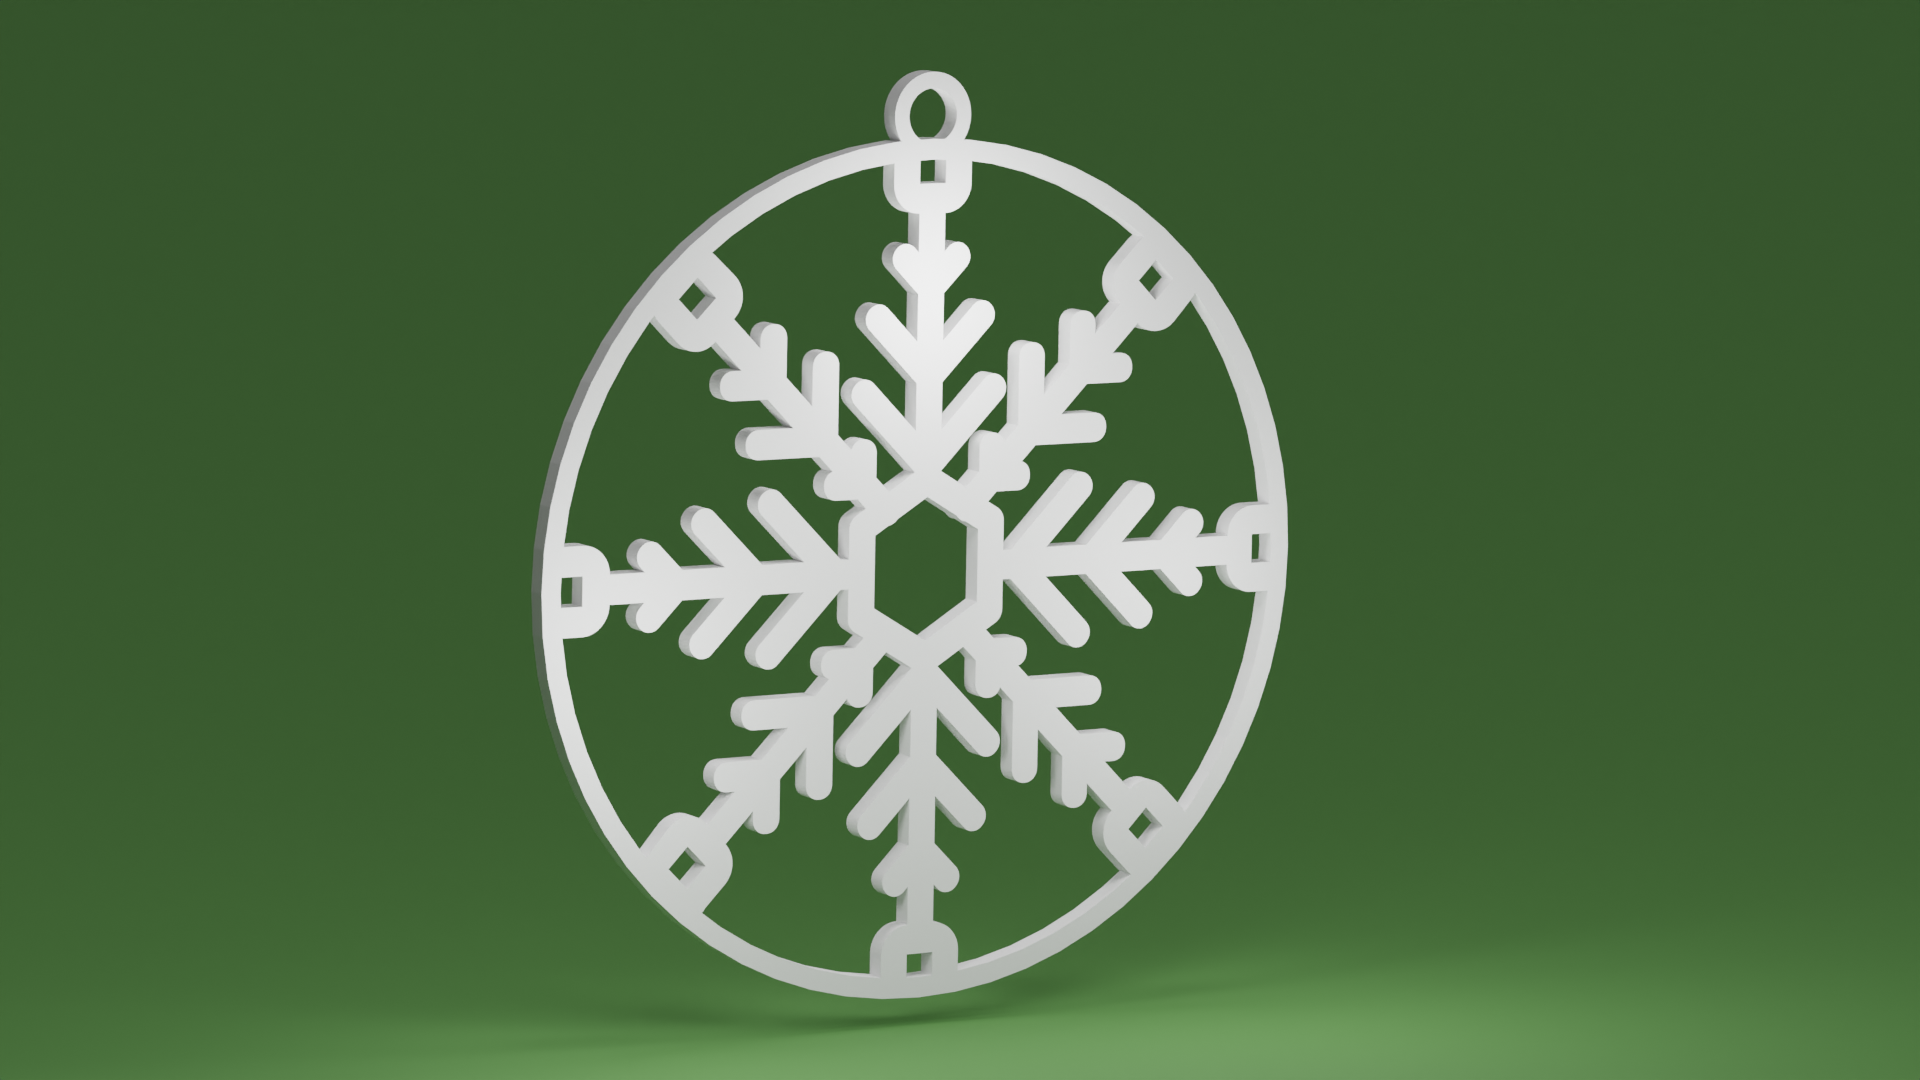 Snowflake 06 inside a bauble (Christmas tree ornament)